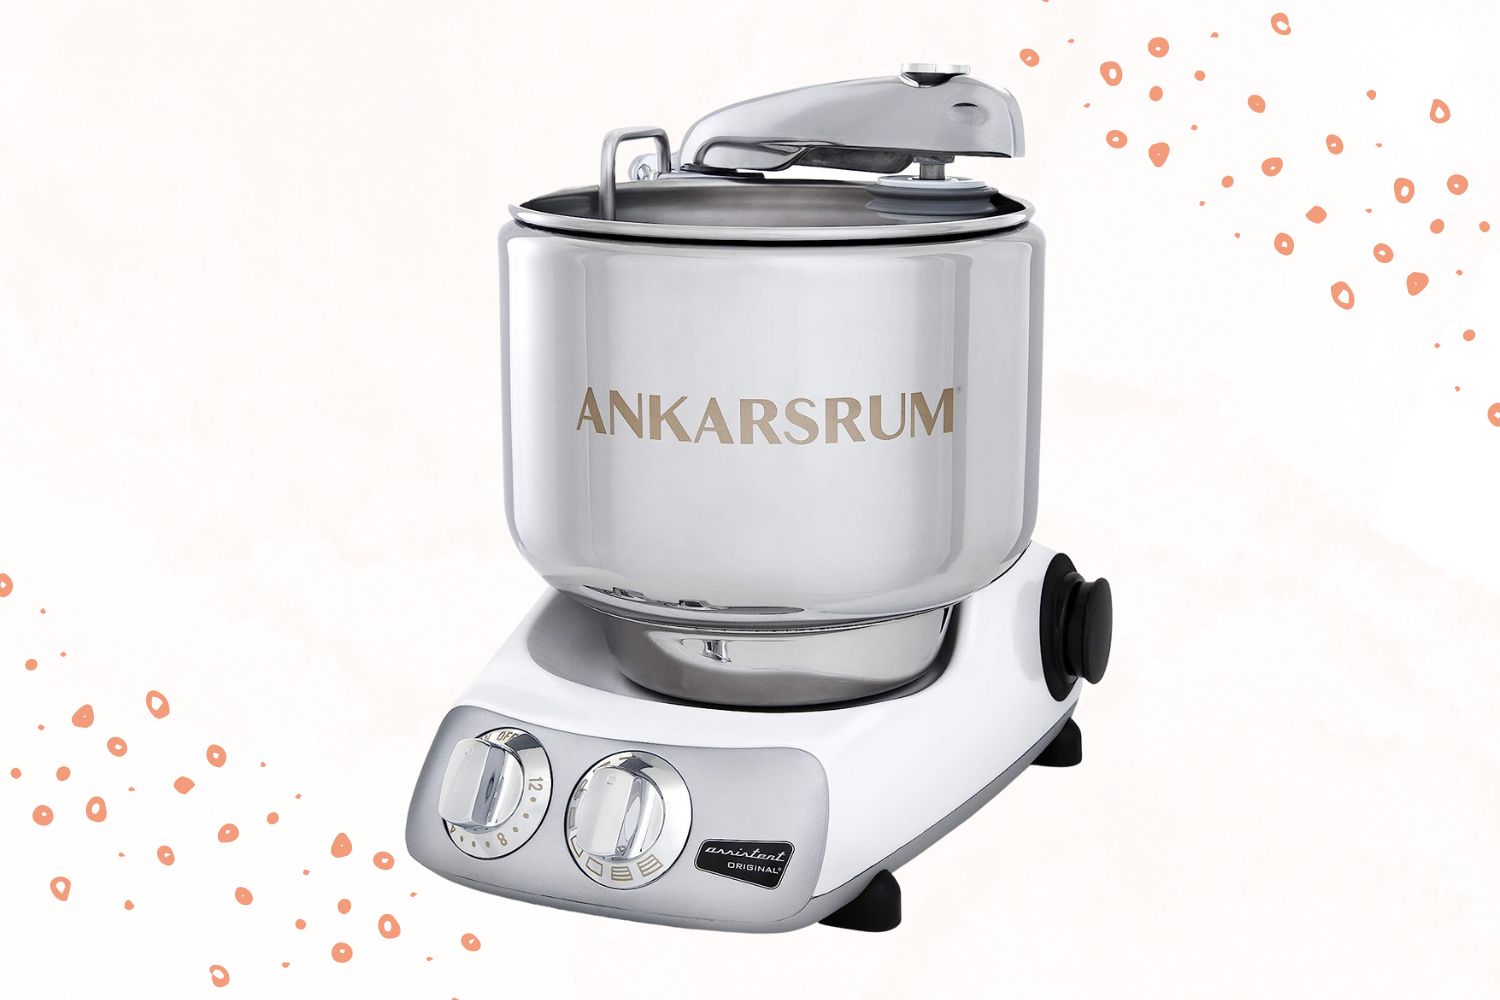 Ankarsrum Stainless Steel Original 7 Liter Stand Mixer: Best For Large Batches